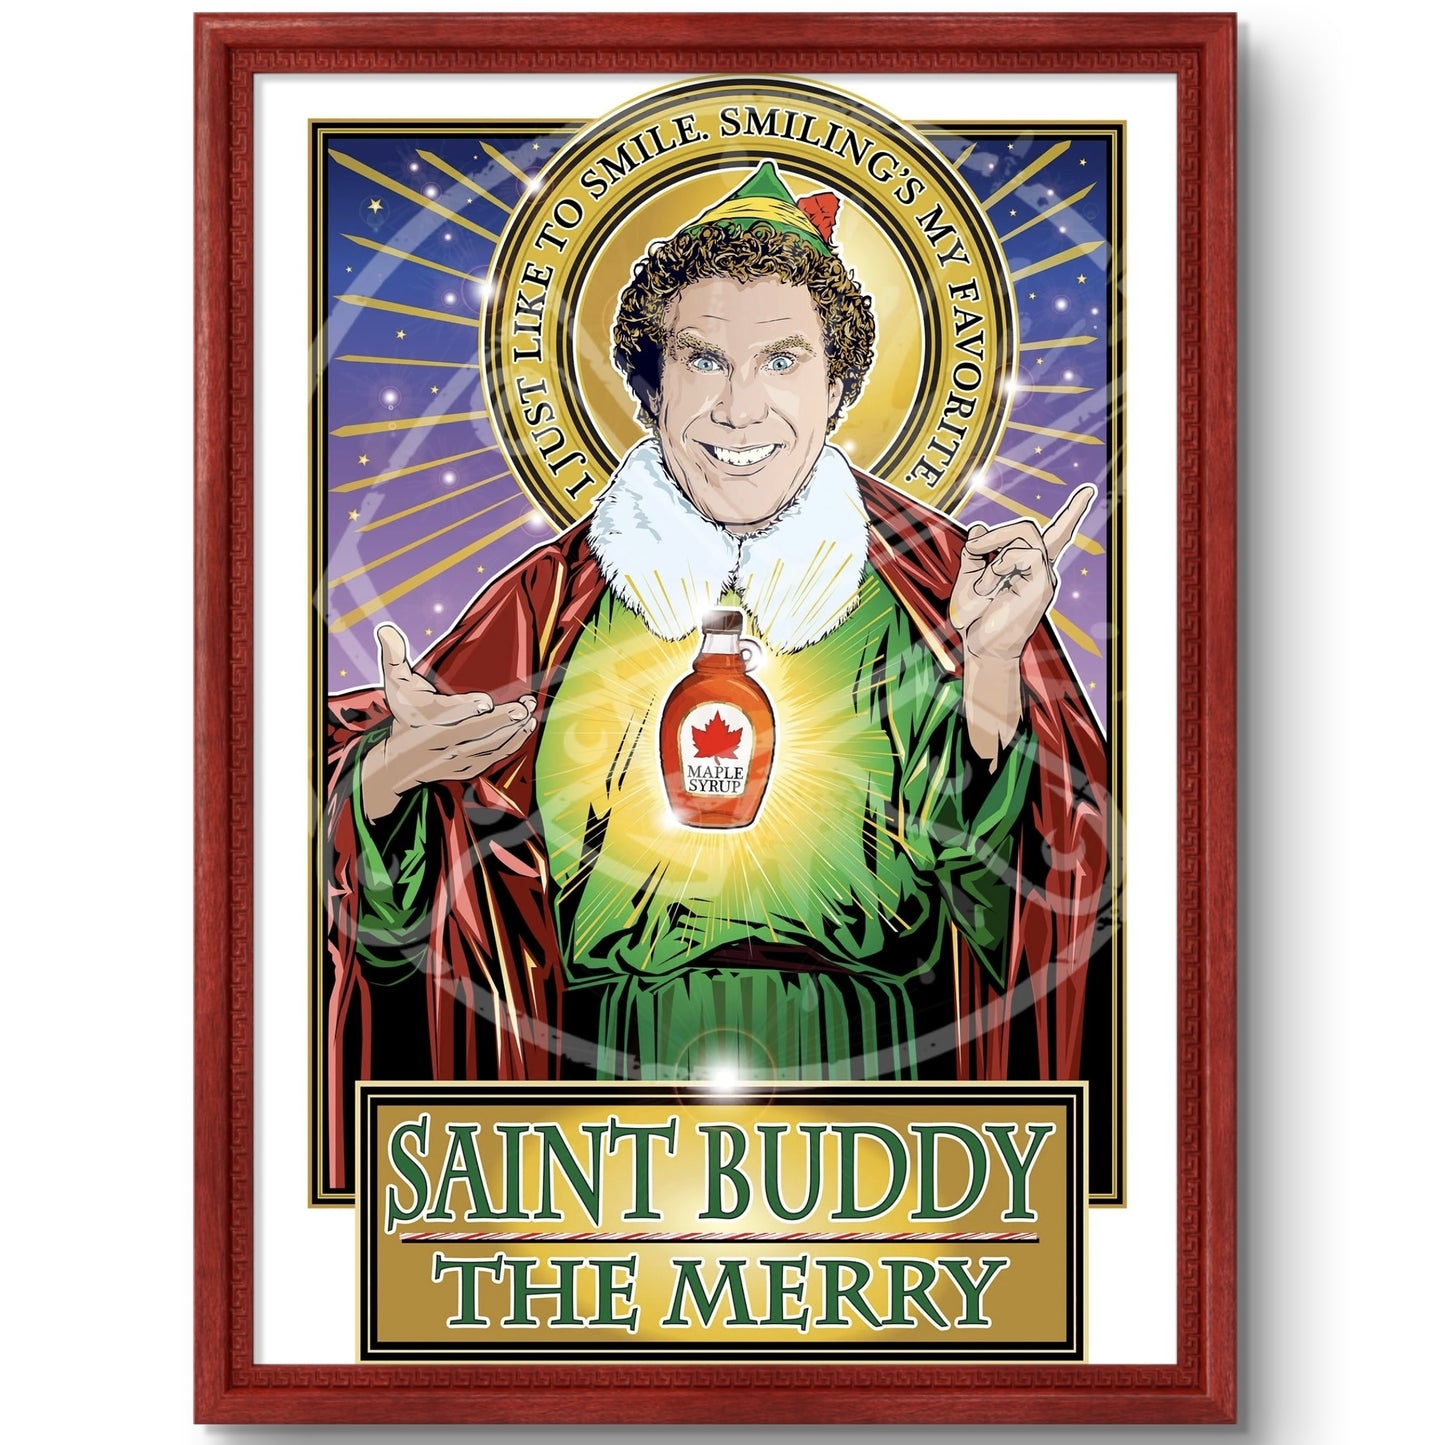 Saint Buddy The Merry Poster